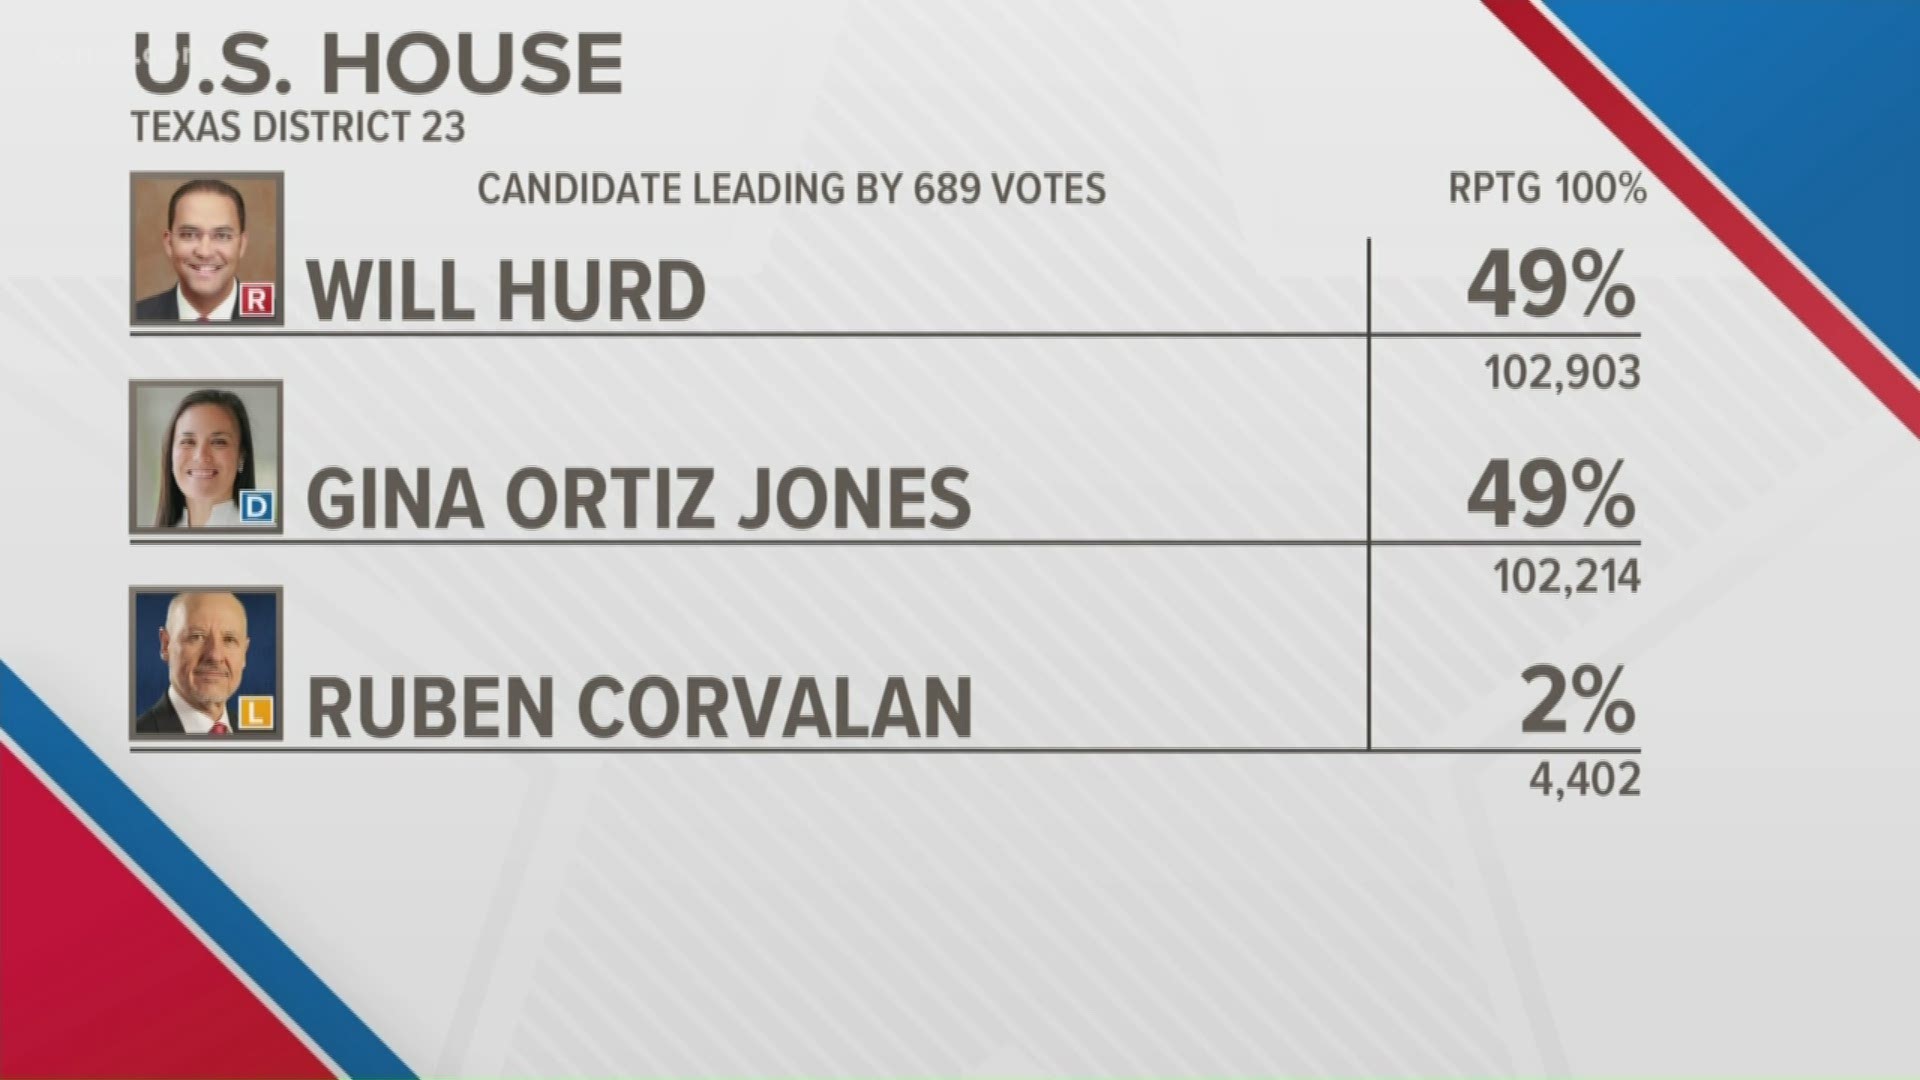 With 100 percent of precincts reporting, Hurd had a 689 vote lead as of 1:00 p.m. Ortiz Jones could call for a recount.